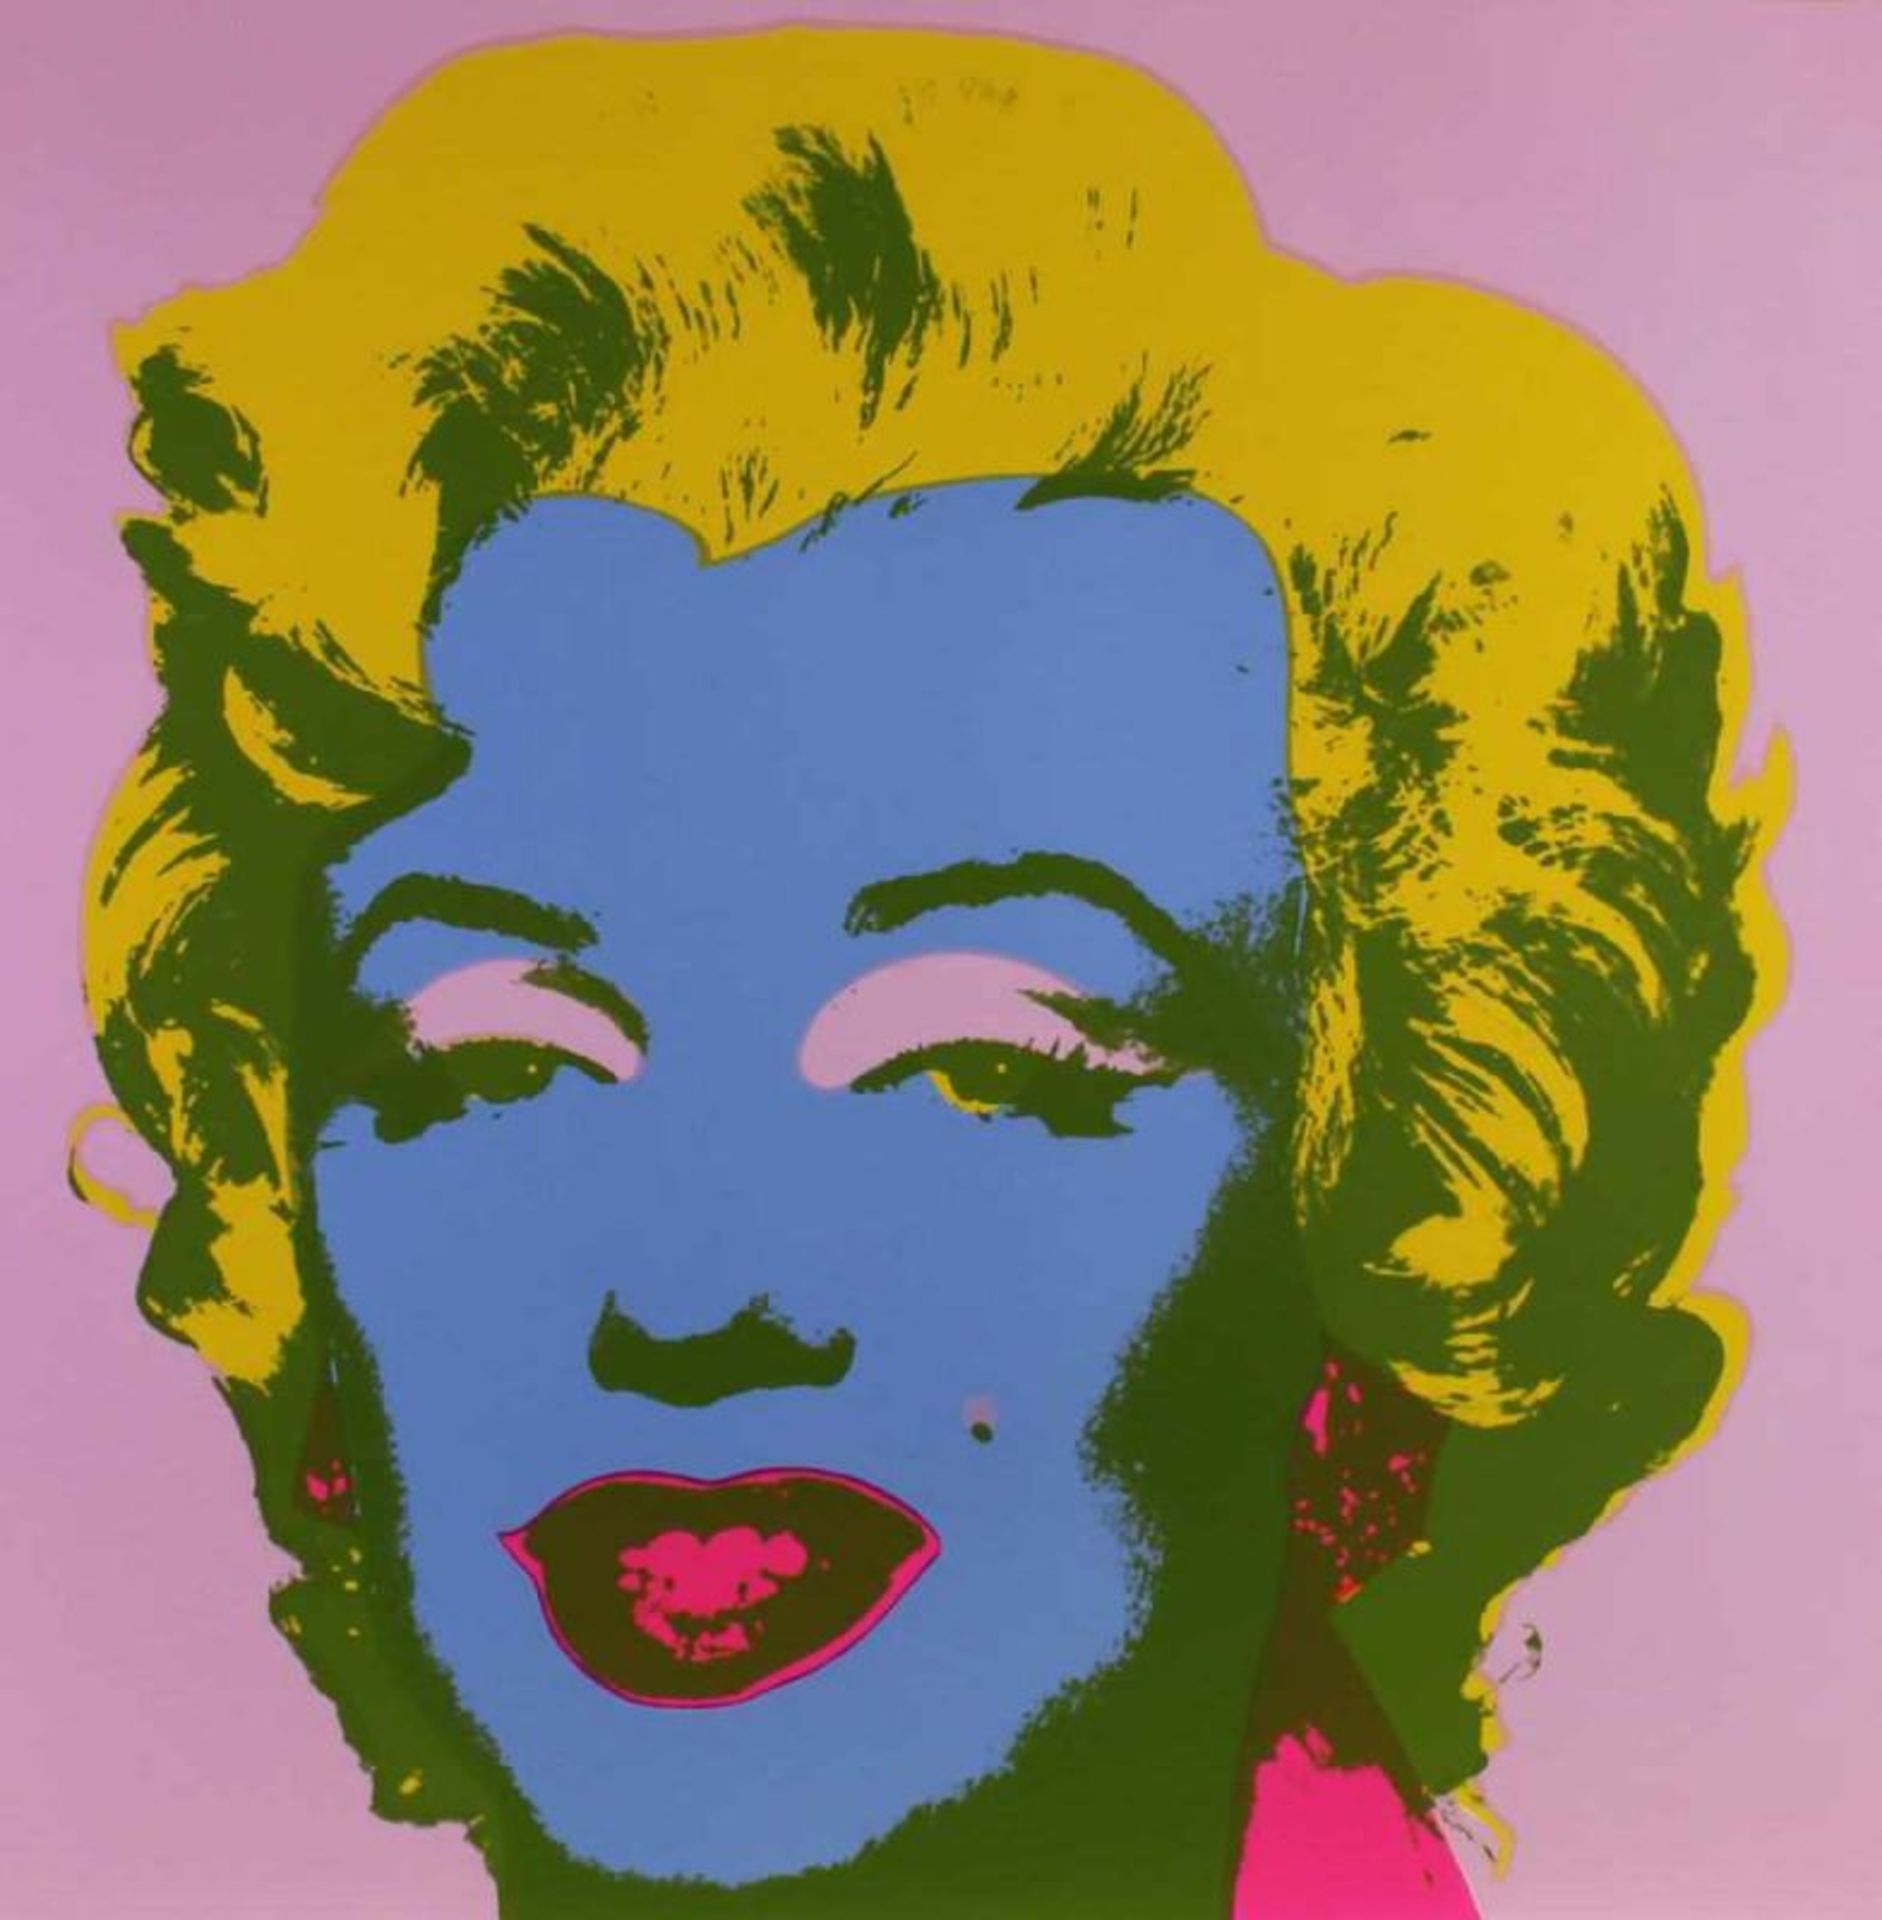 Warhol, Andy (1928 Pittsburgh - 1987 New York), 10 Farbserigrafien, "Marilyn Monroe", published by - Image 6 of 10